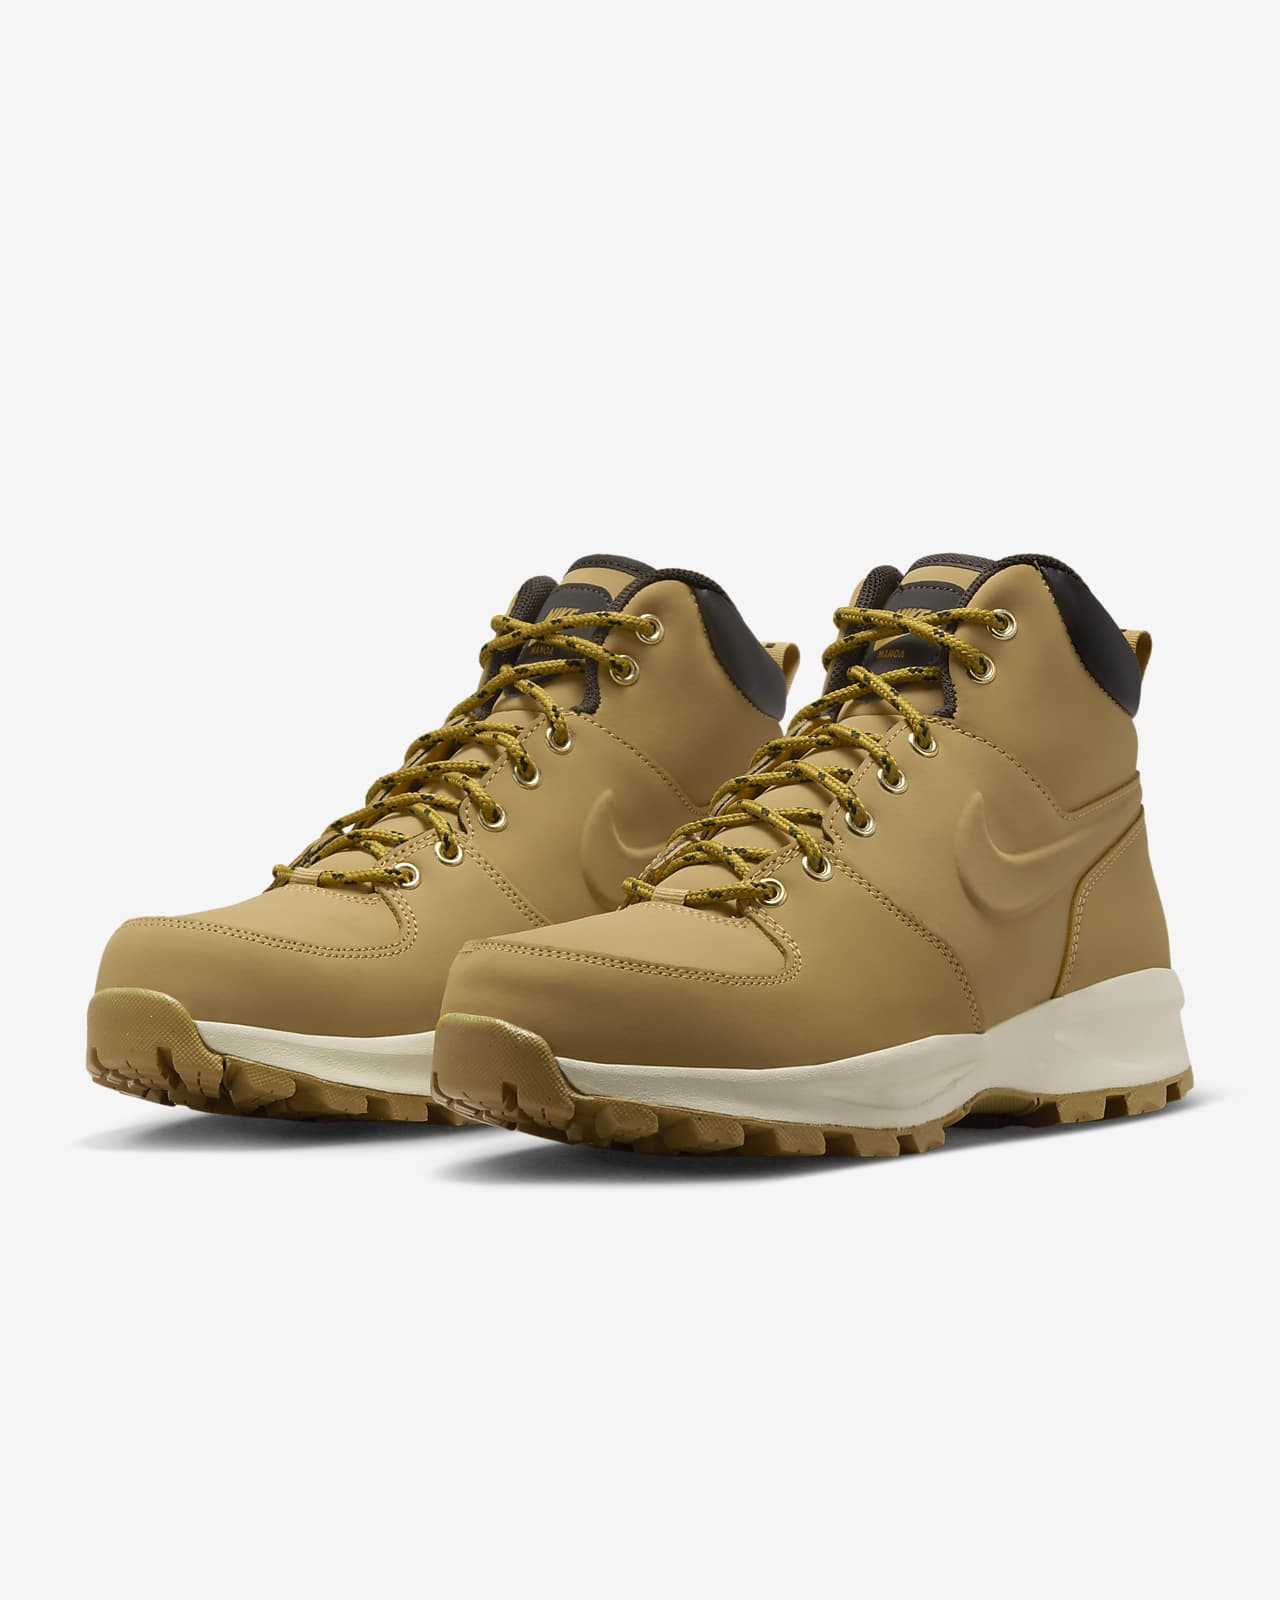 Nike Manoa Leather Boots. Men\'s